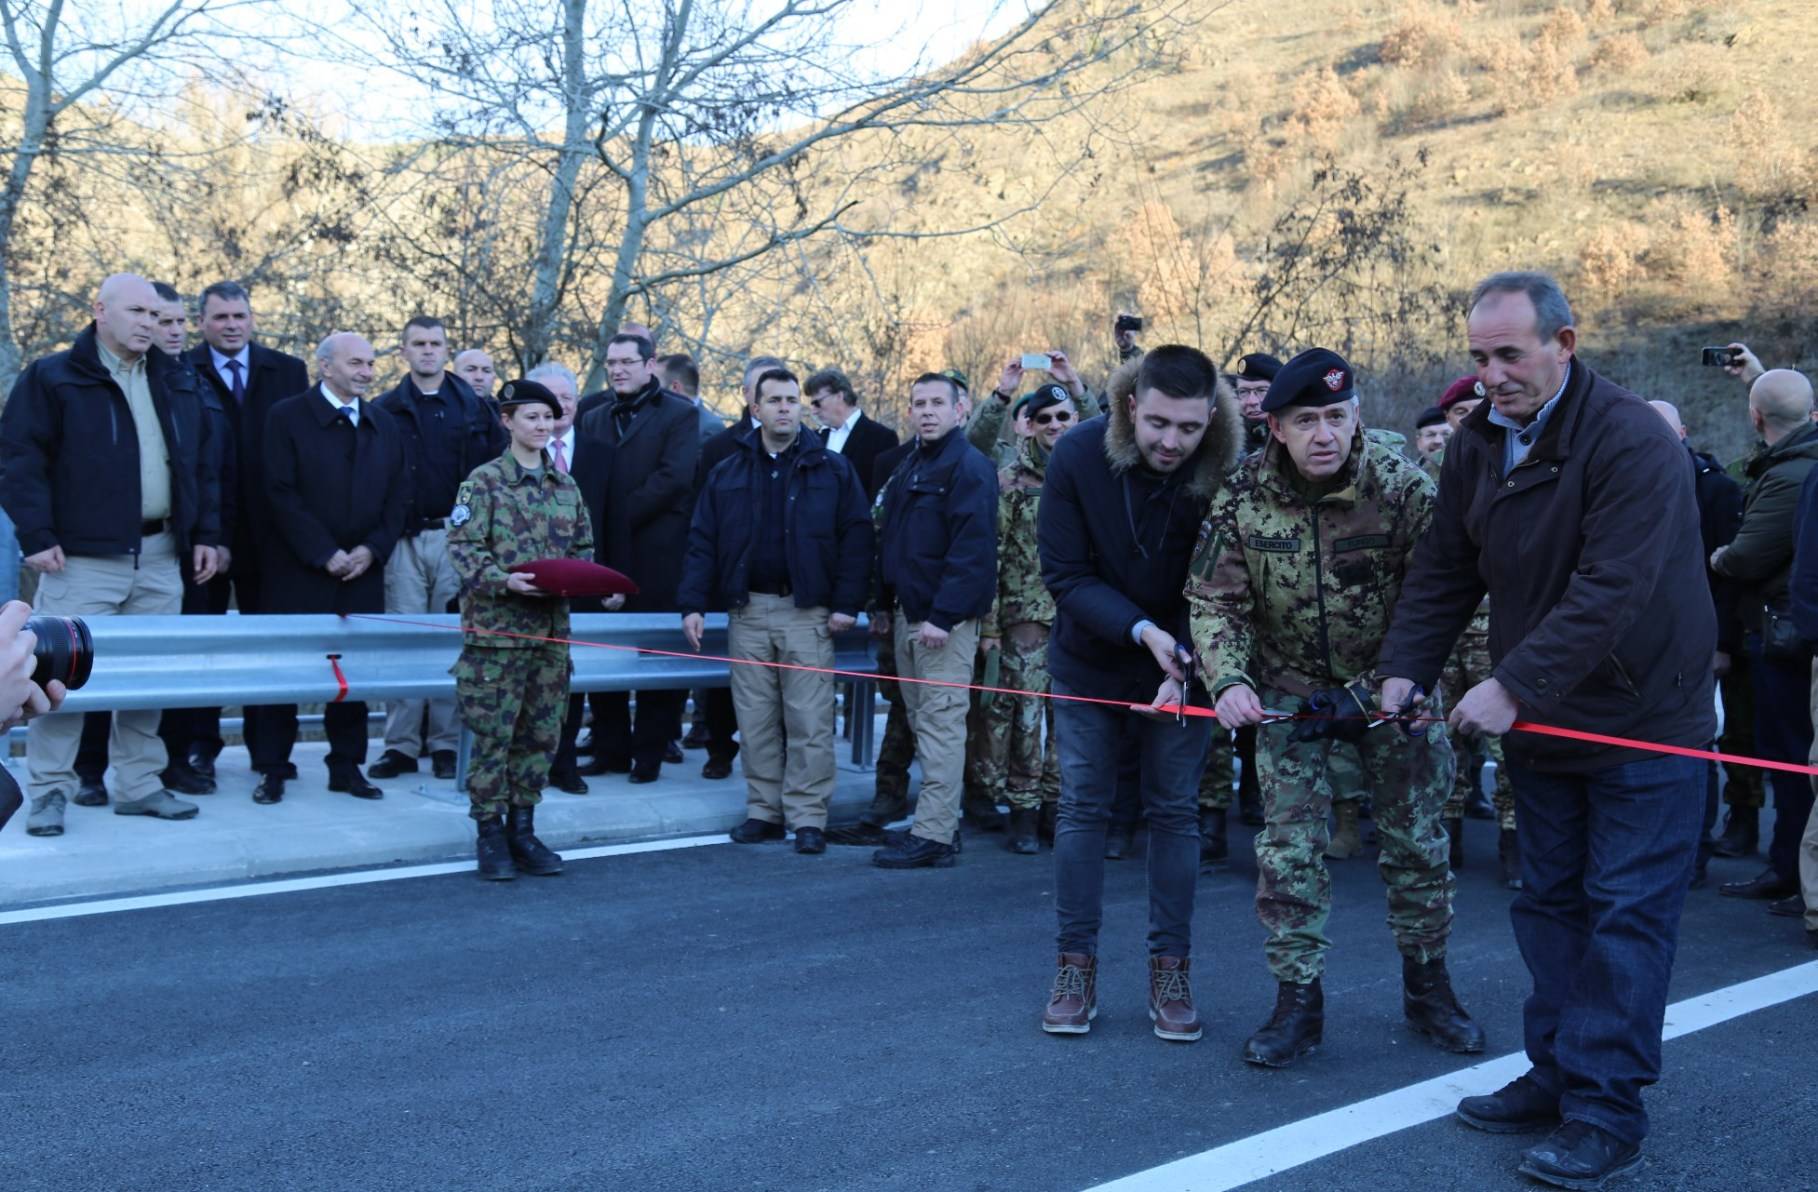 Opening ceremony of the new bridge on the Bistrica River